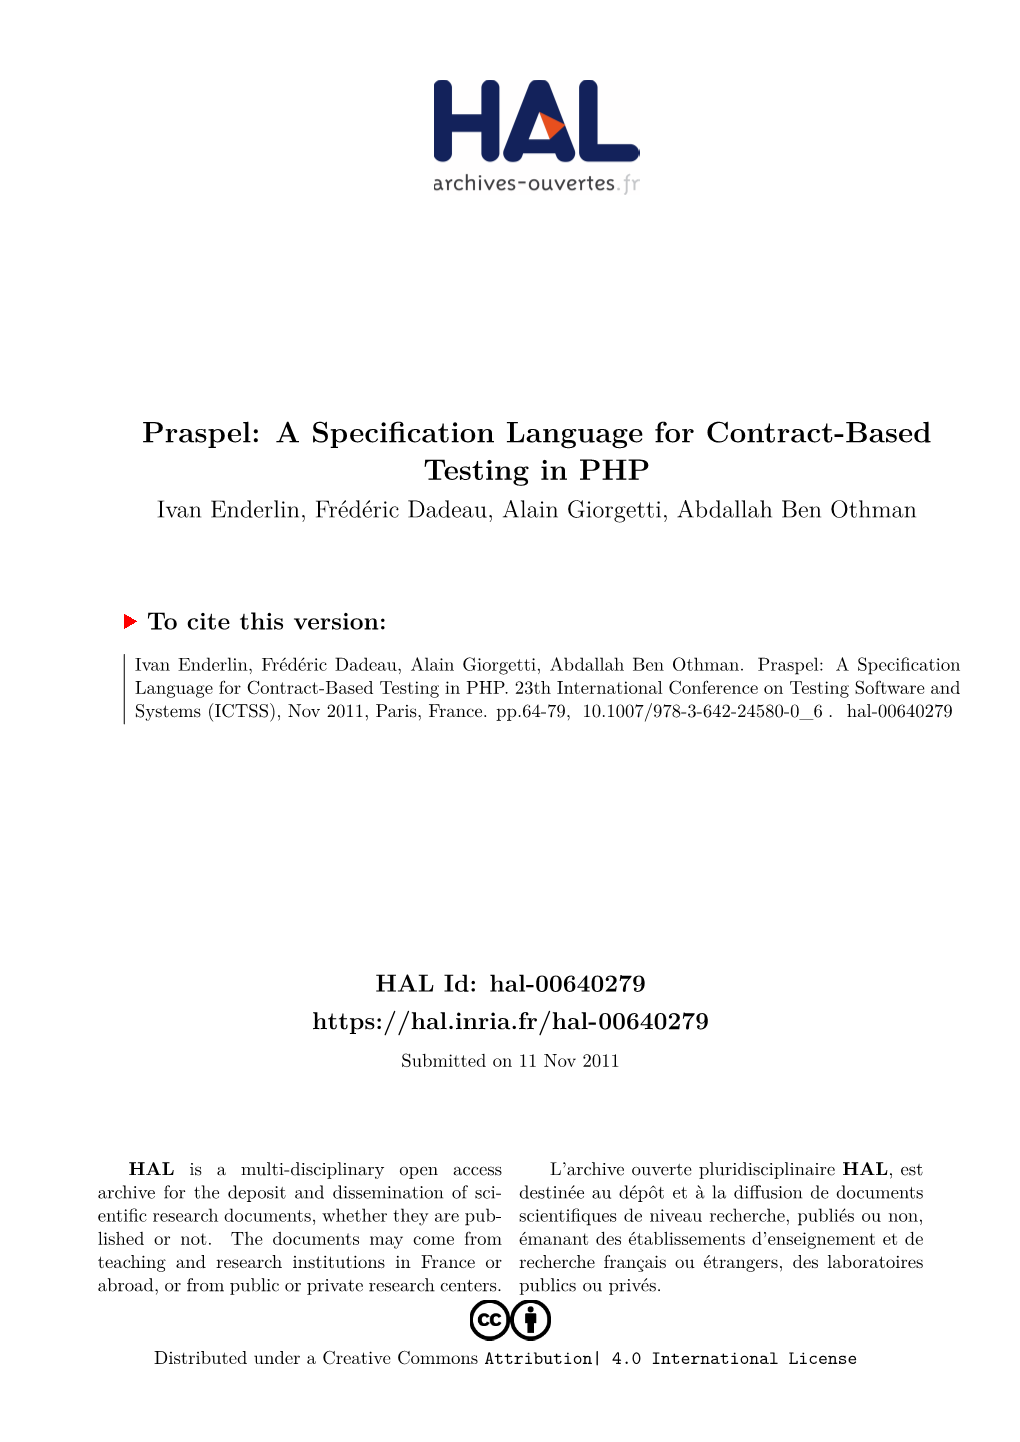 Praspel: a Specification Language for Contract-Based Testing in PHP Ivan Enderlin, Frédéric Dadeau, Alain Giorgetti, Abdallah Ben Othman